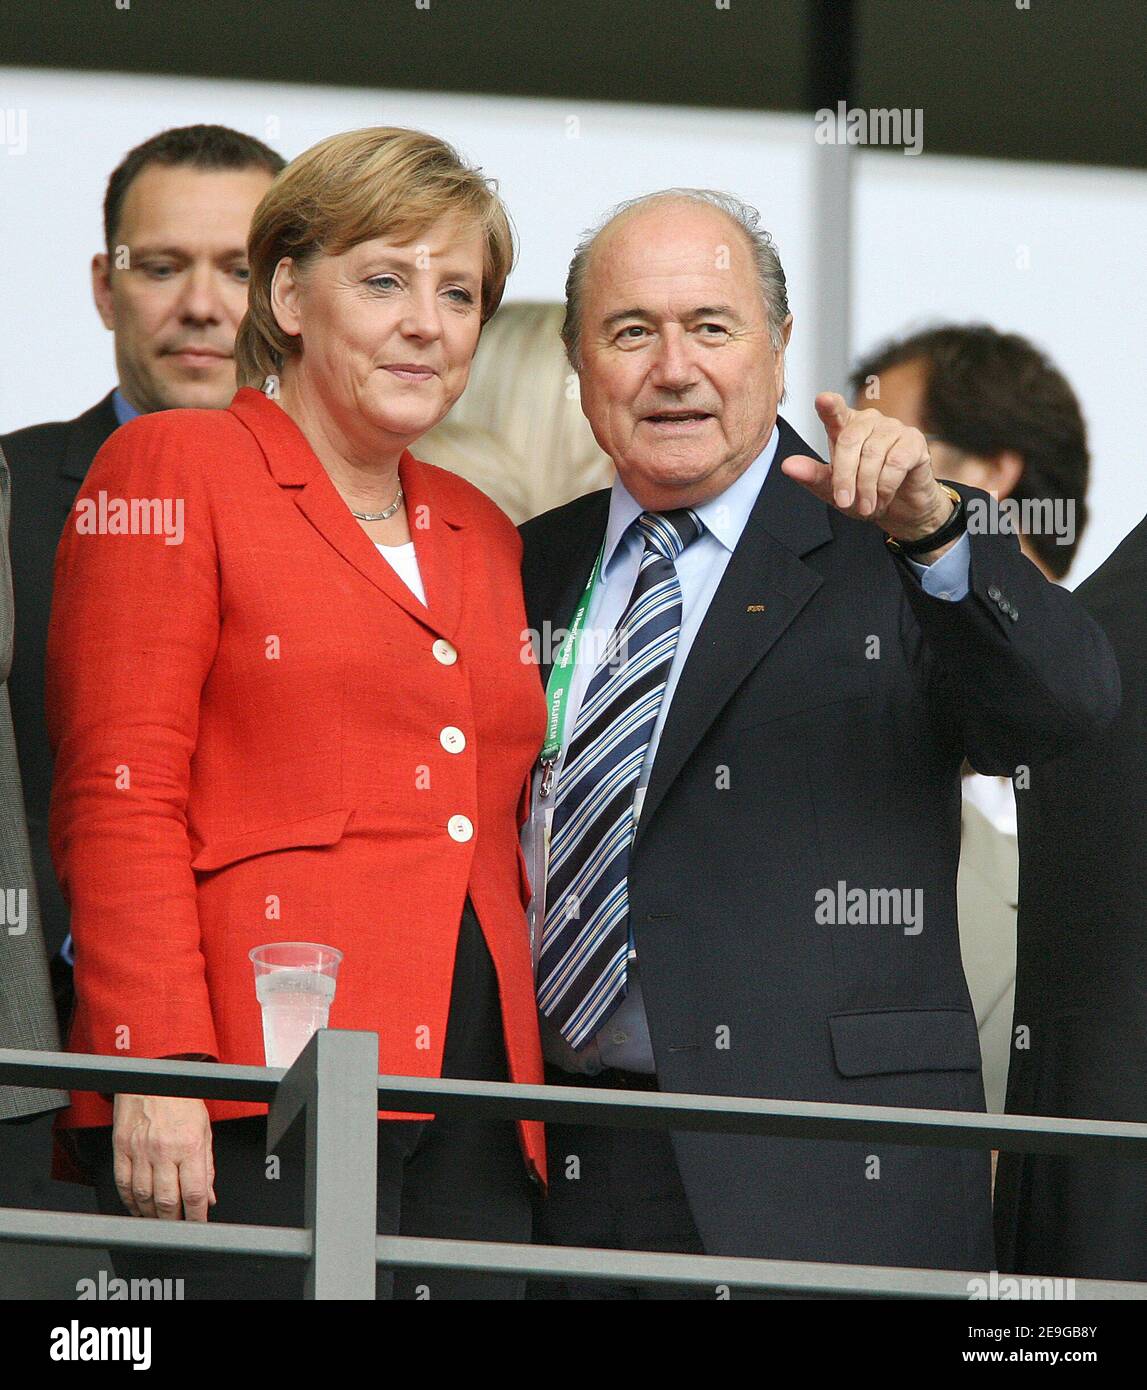 German Chancellor Angela Merkel and FIFA President Sepp Blatter during the FIFA World Cup 2006, quarter final, Germany vs Argentina, in Berlin, Germany, on June 30, 2006. The game ended in draw 1-1 and Germany won (4-2) in a penalty-kick shootout. Photo by Gouhier-Hahn-Orban/Cameleon/ABACAPRESS.COM Stock Photo